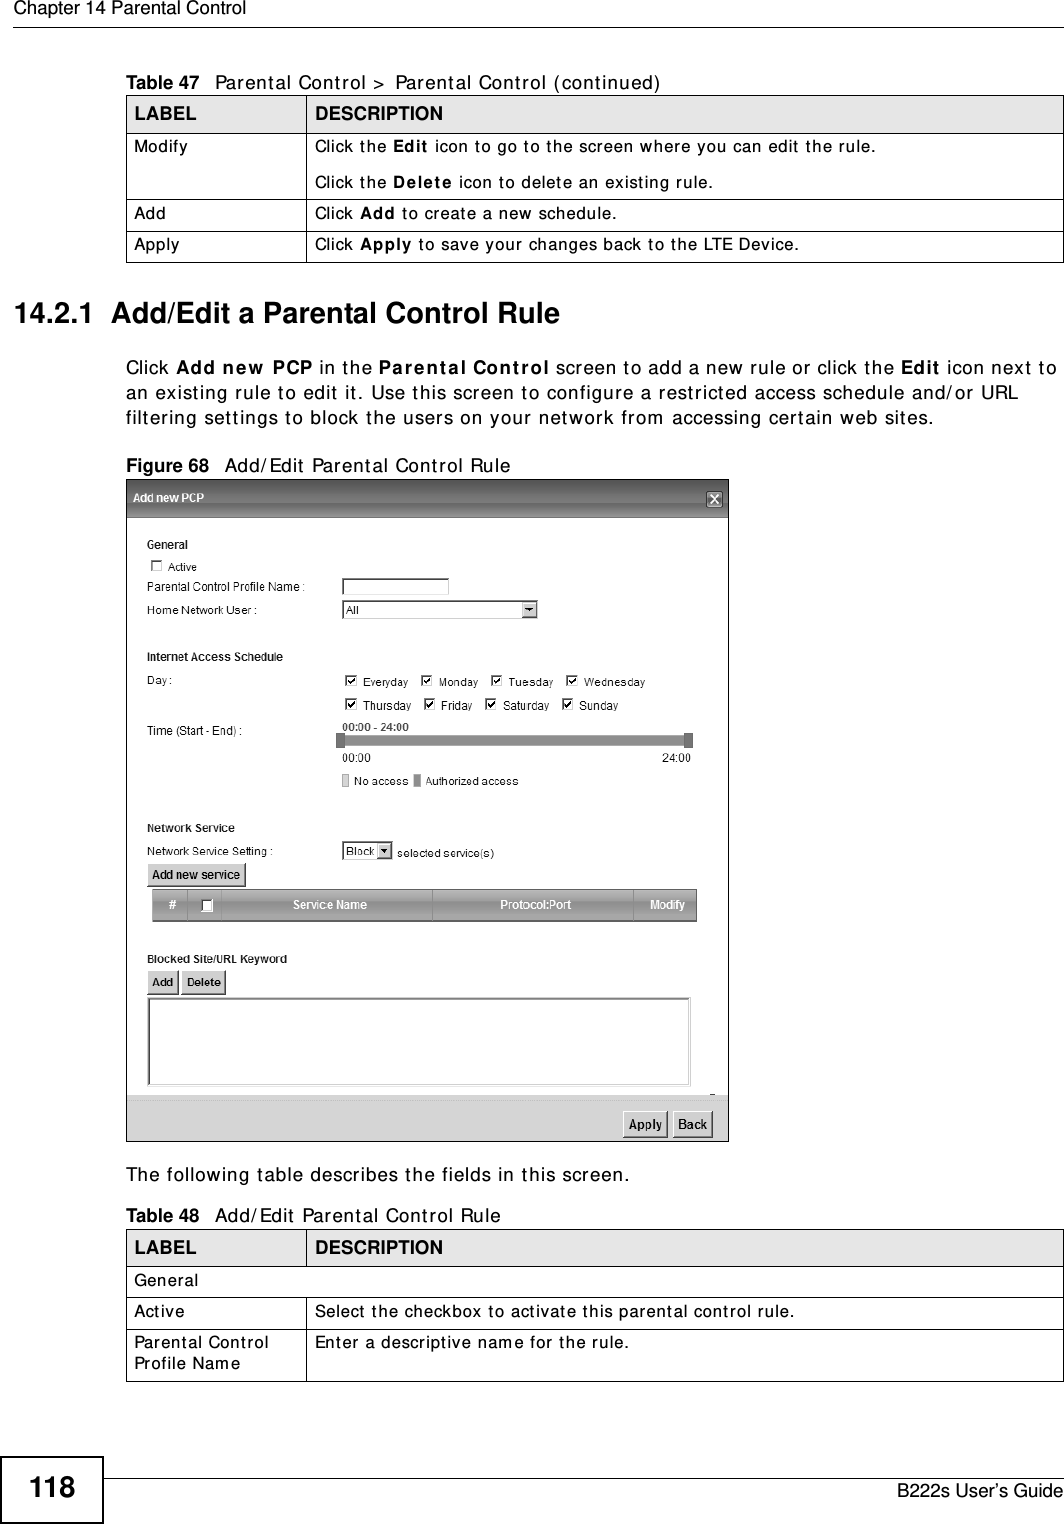 Chapter 14 Parental ControlB222s User’s Guide11814.2.1  Add/Edit a Parental Control RuleClick Add new  PCP in t he Pa r ent a l Con t rol screen t o add a new rule or click t he Edit  icon next  t o an existing rule t o edit it. Use this screen to configure a restrict ed access schedule and/ or URL filt ering set tings t o block the users on your net work from  accessing certain web sit es.Figure 68   Add/ Edit  Par ent al Cont rol Rule The following t able describes t he fields in t his screen. Modify Click the Edit  icon to go t o the screen where you can edit  the r ule.Click the D e le t e  icon to delet e an existing rule.Add Click Add to create a new schedule.Apply Click Apply t o save your changes back t o the LTE Device.Table 47   Parent al Control &gt;  Parent al Cont rol ( continued)LABEL DESCRIPTIONTable 48   Add/ Edit  Parental Control RuleLABEL DESCRIPTIONGeneralAct ive Select  the check box t o act ivat e this par ent al cont rol rule.Parent al Control Profile Nam eEnter a descript ive nam e for t he rule.